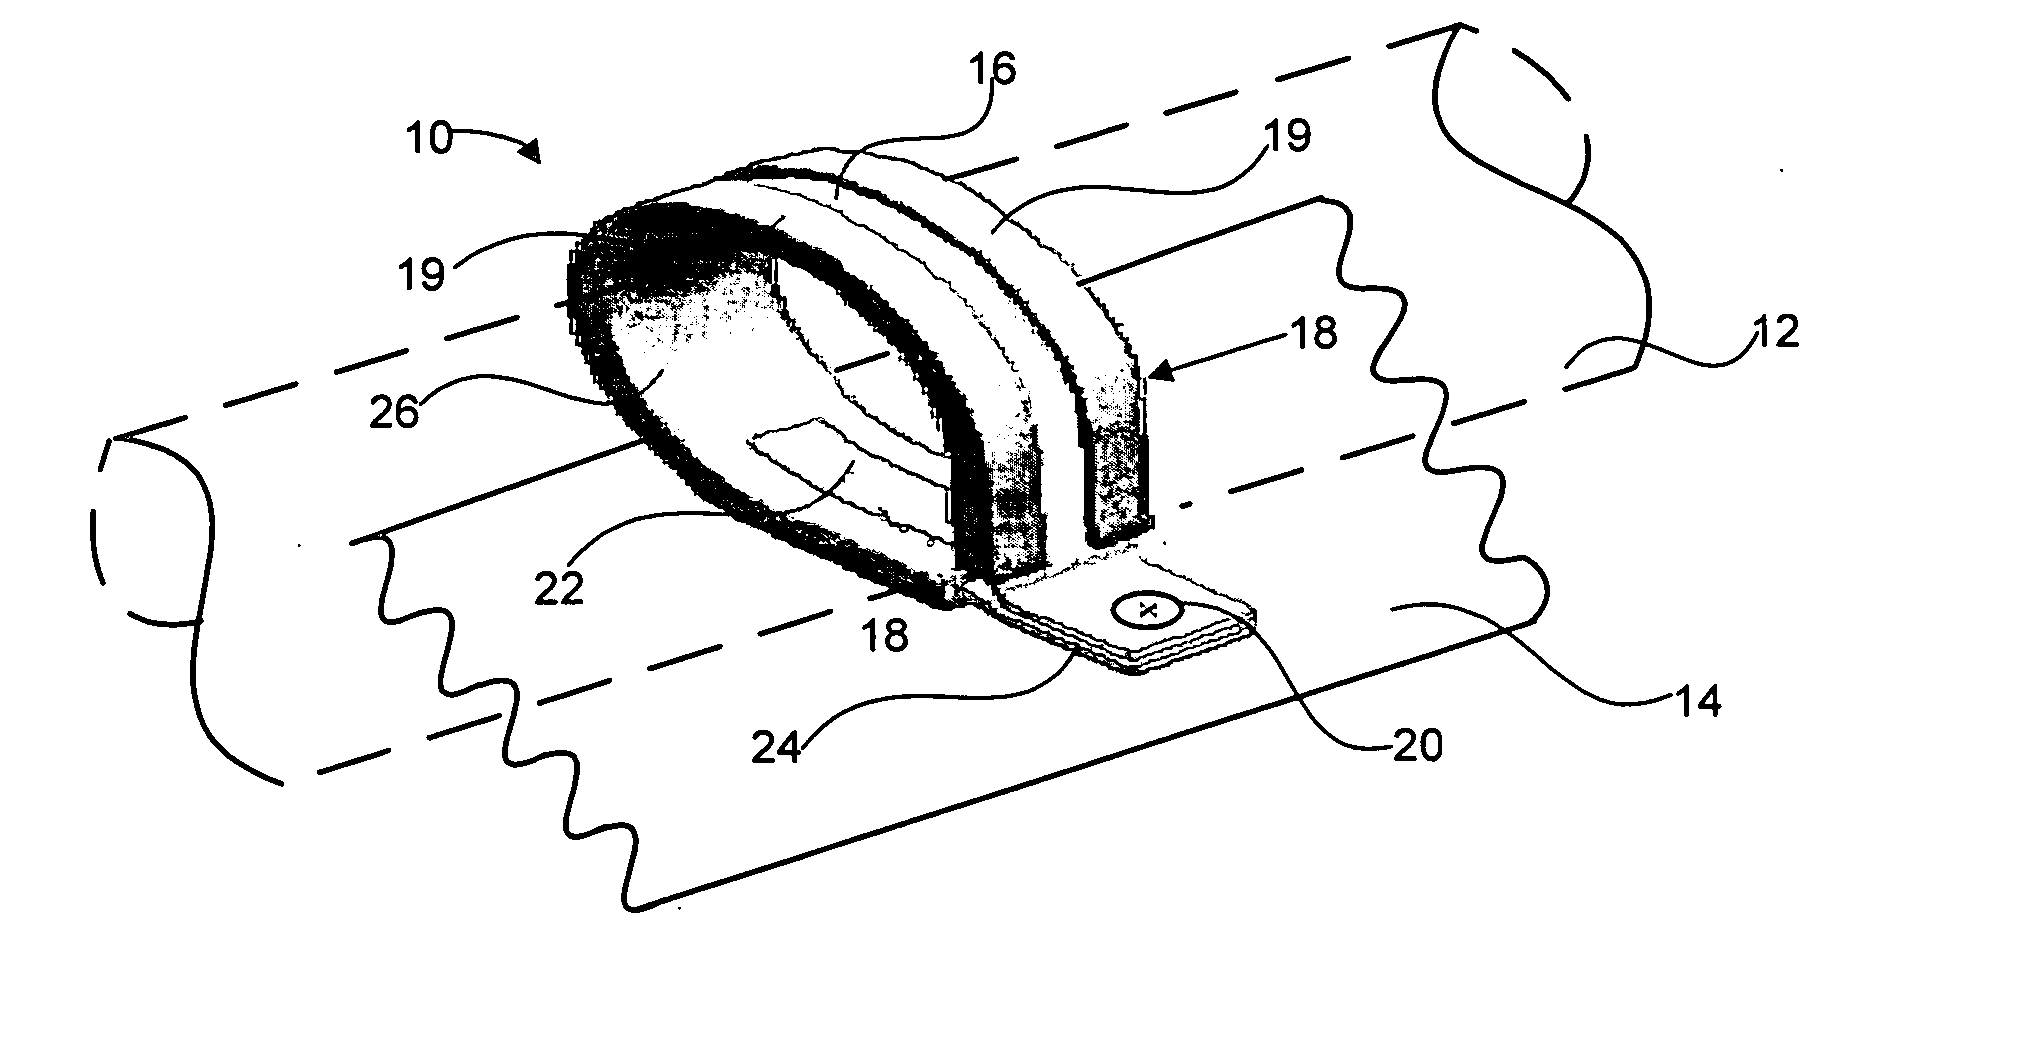 Cushioned grounding clamp